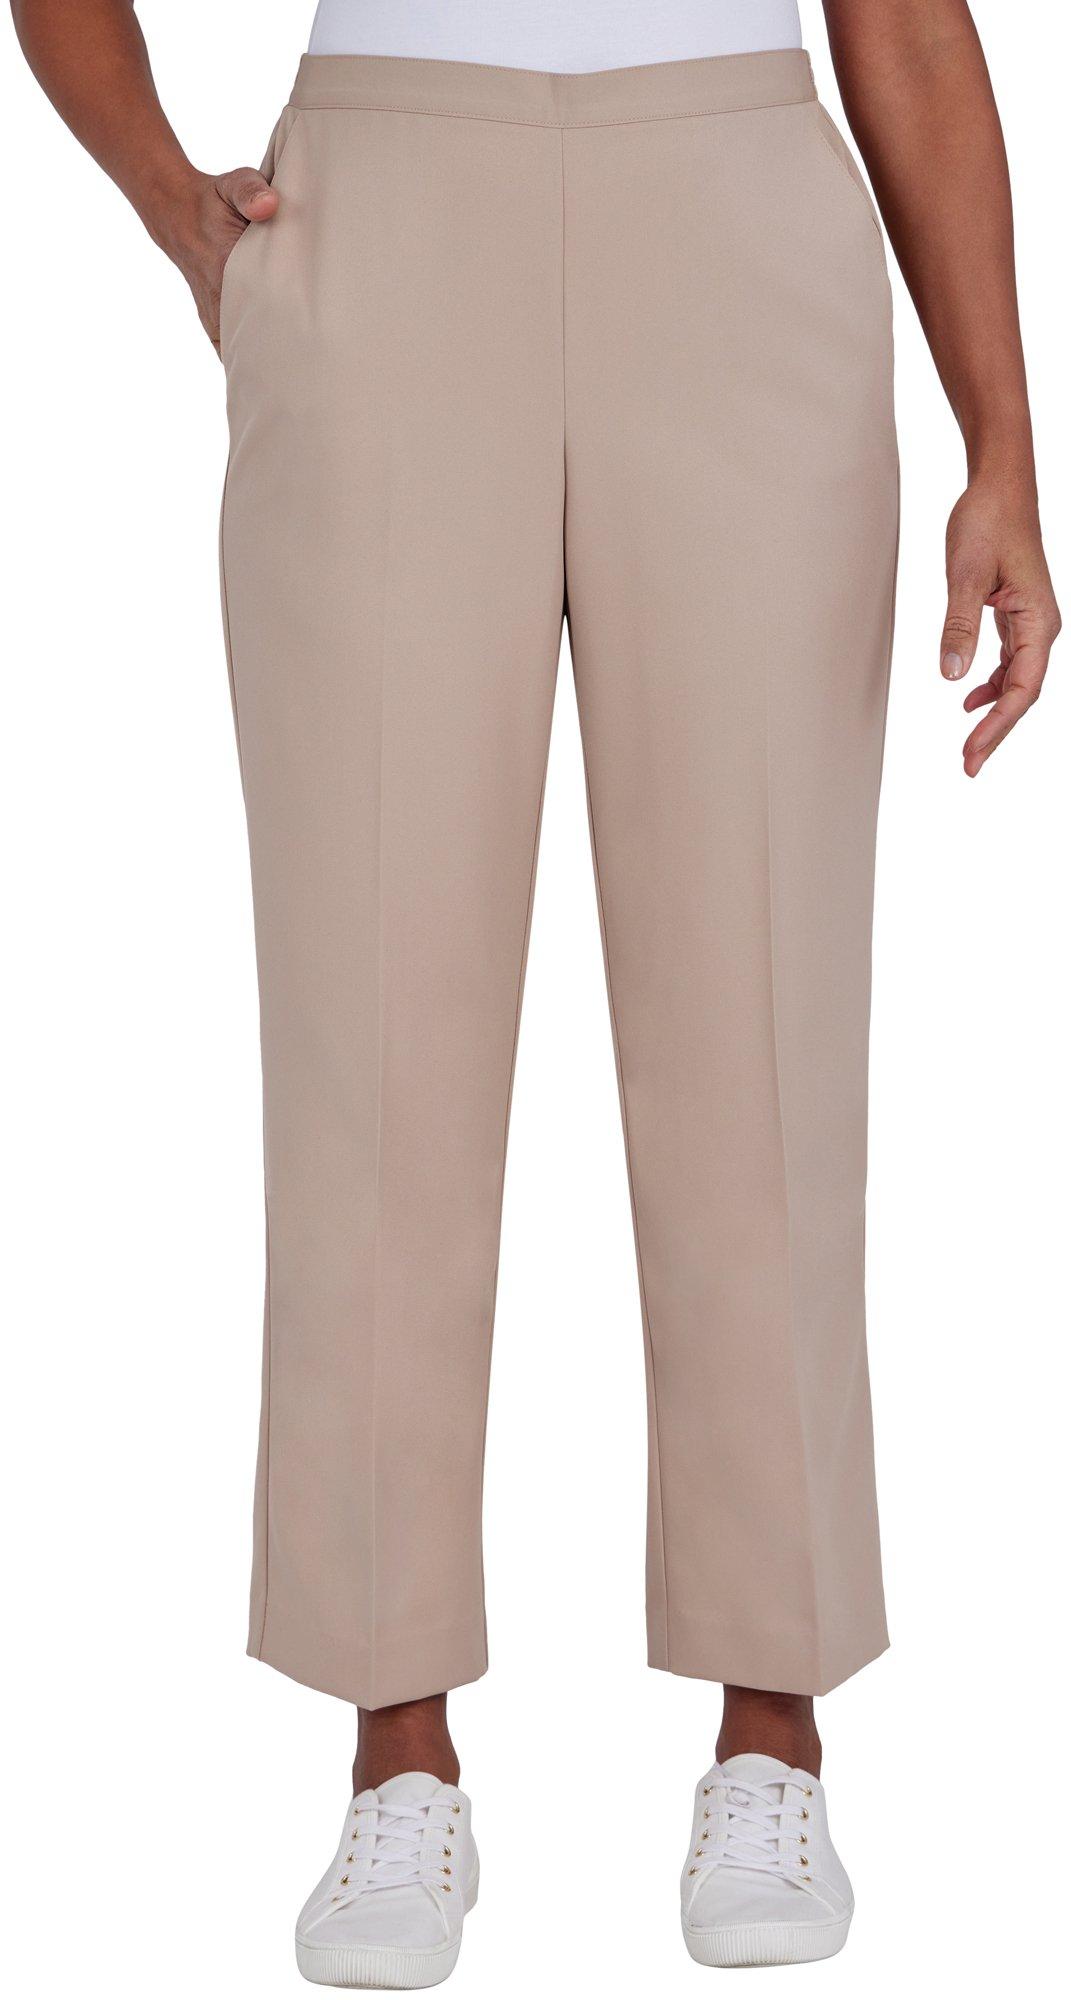 Petite Solid Proportioned Average Studio Pant